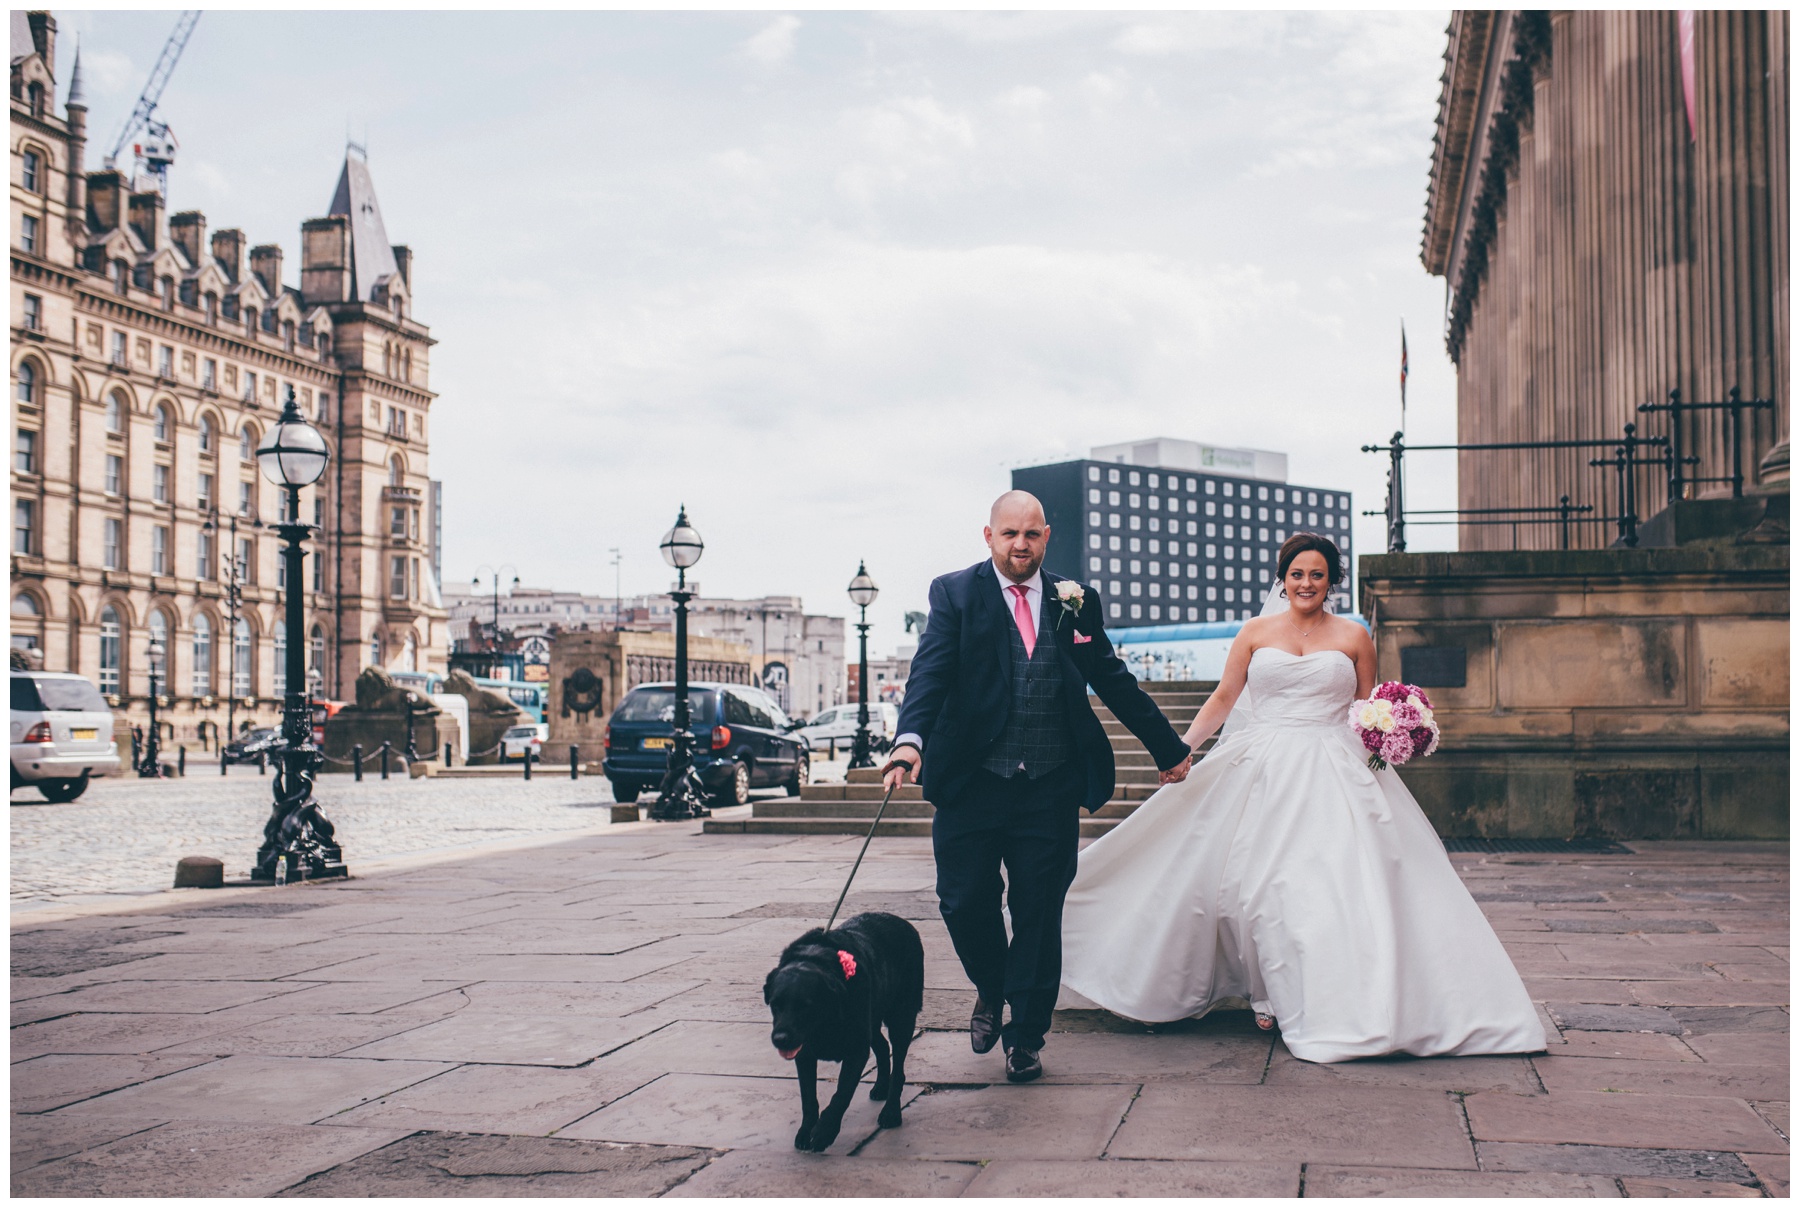 New husband and wife walk their dog in Liverpool city centre just after their wedding.